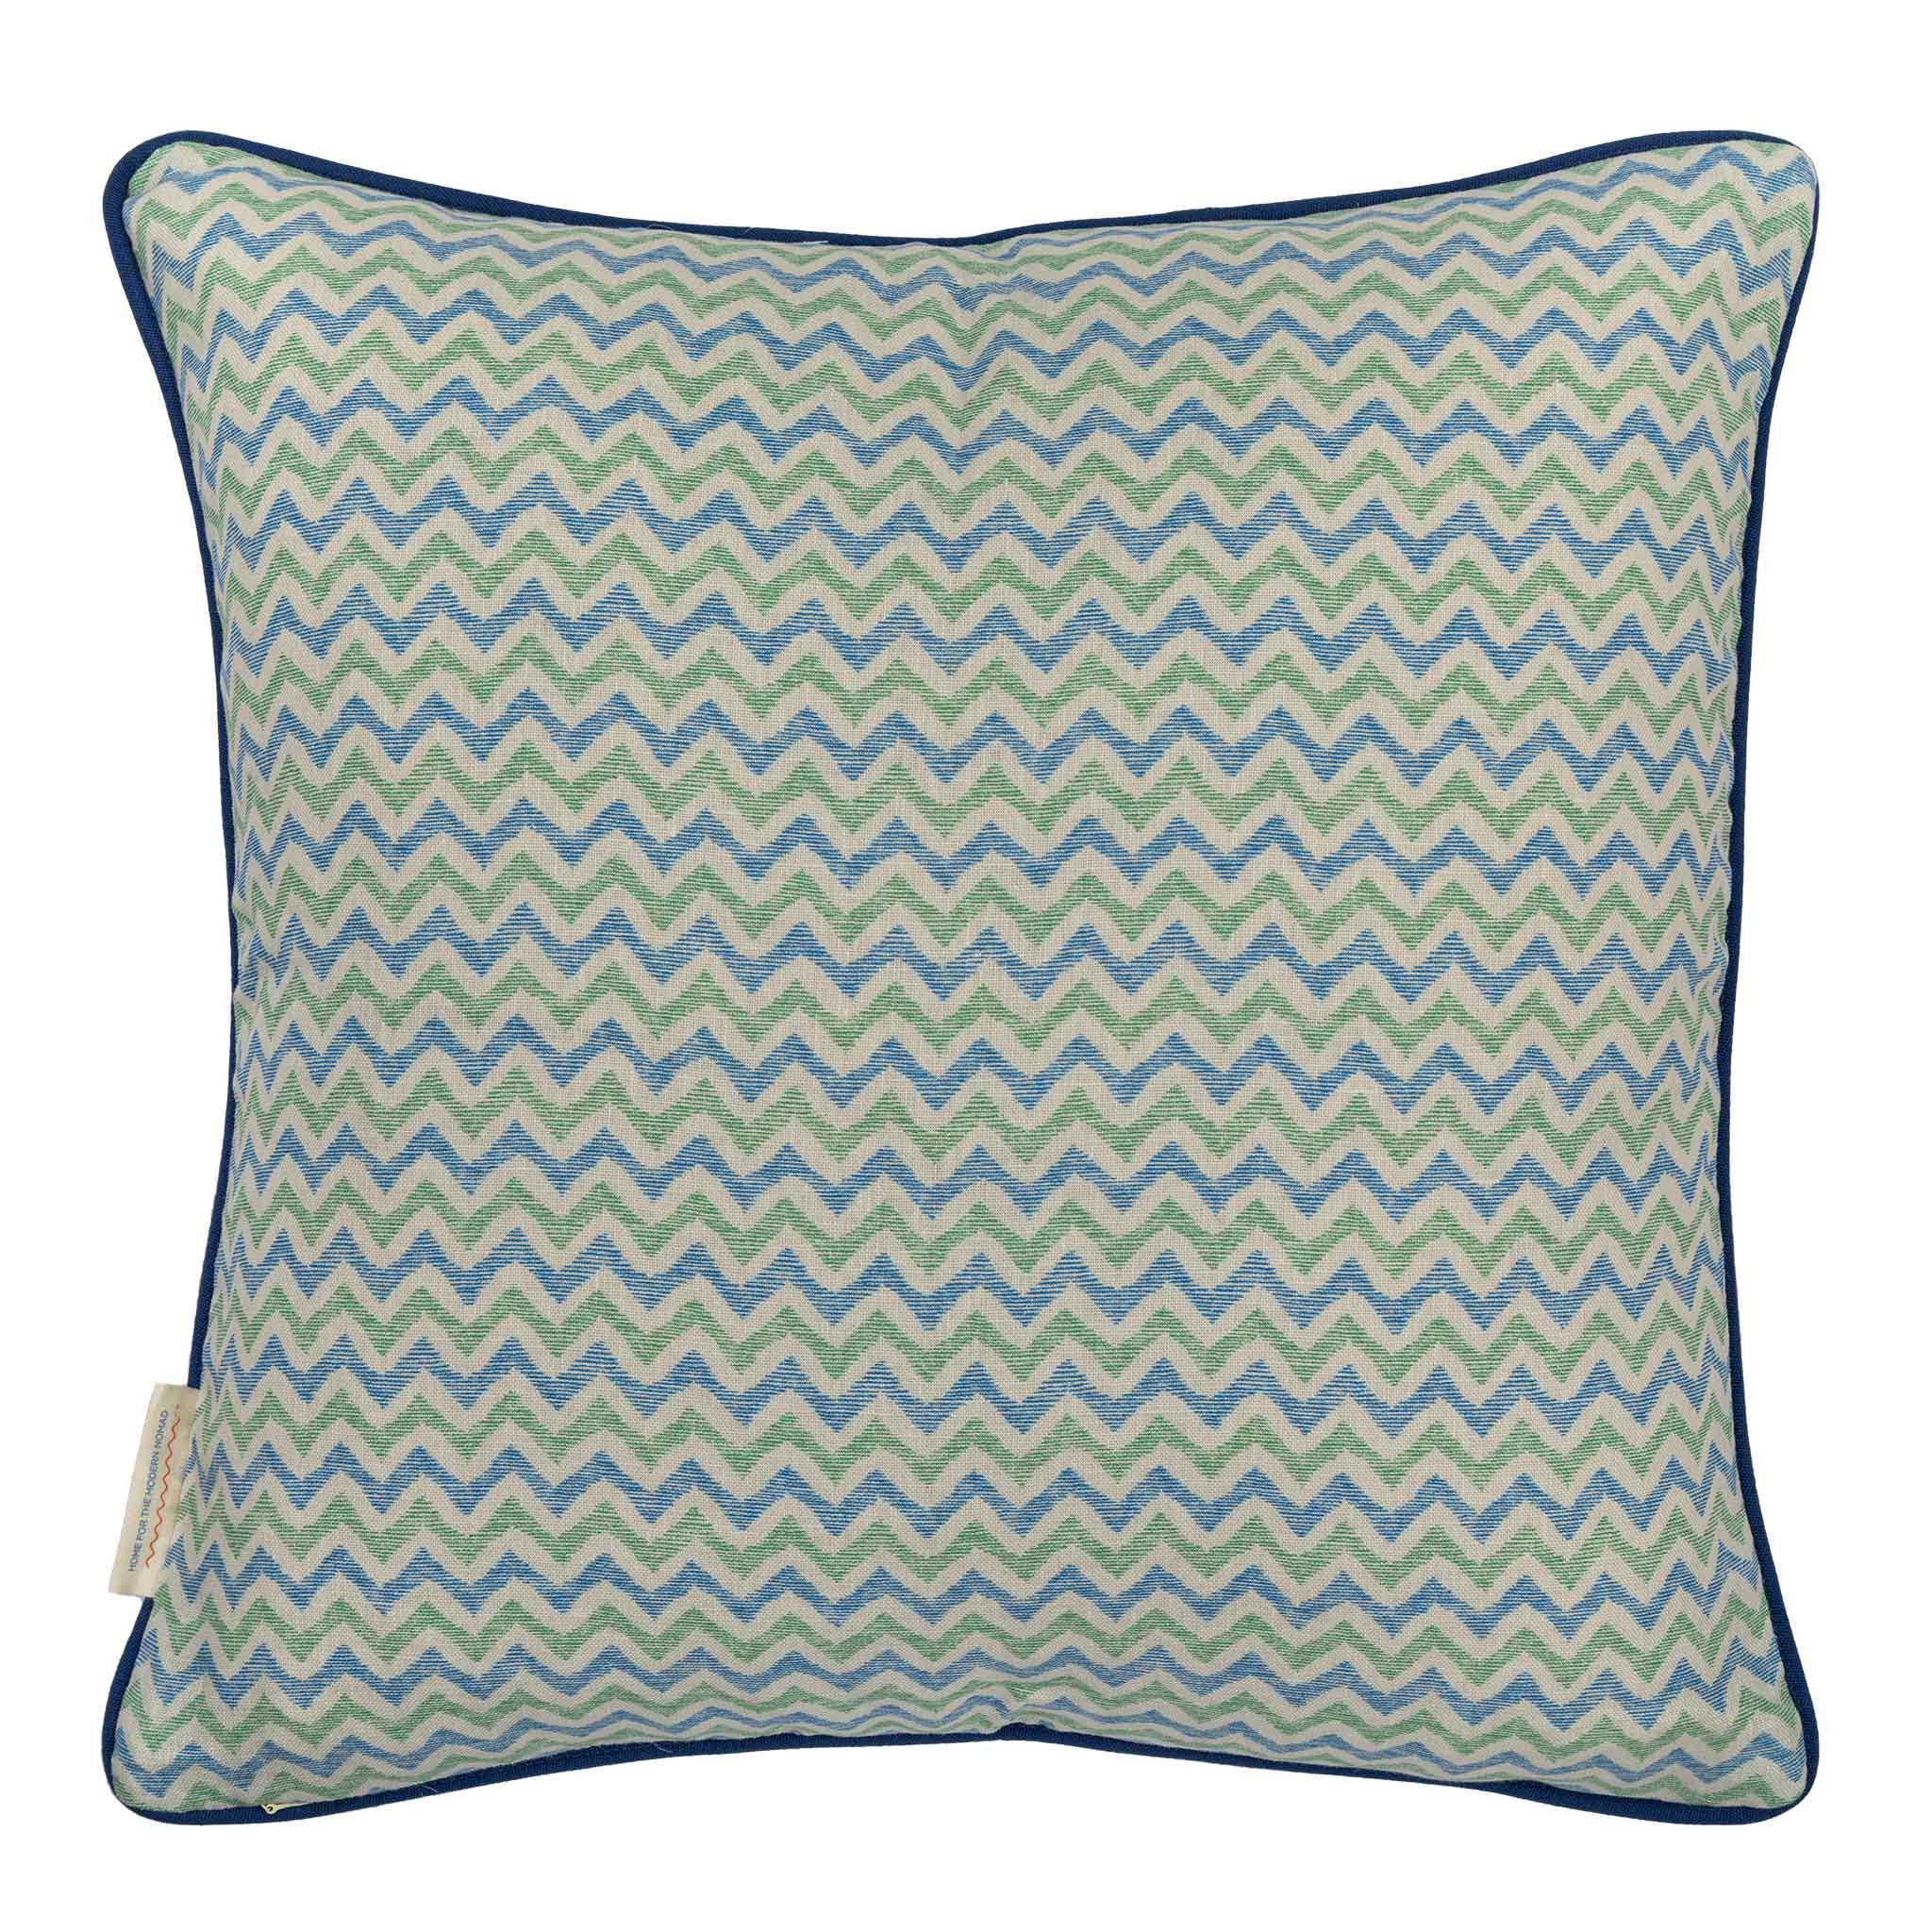 Wicklewood, Ikat Check Cushion